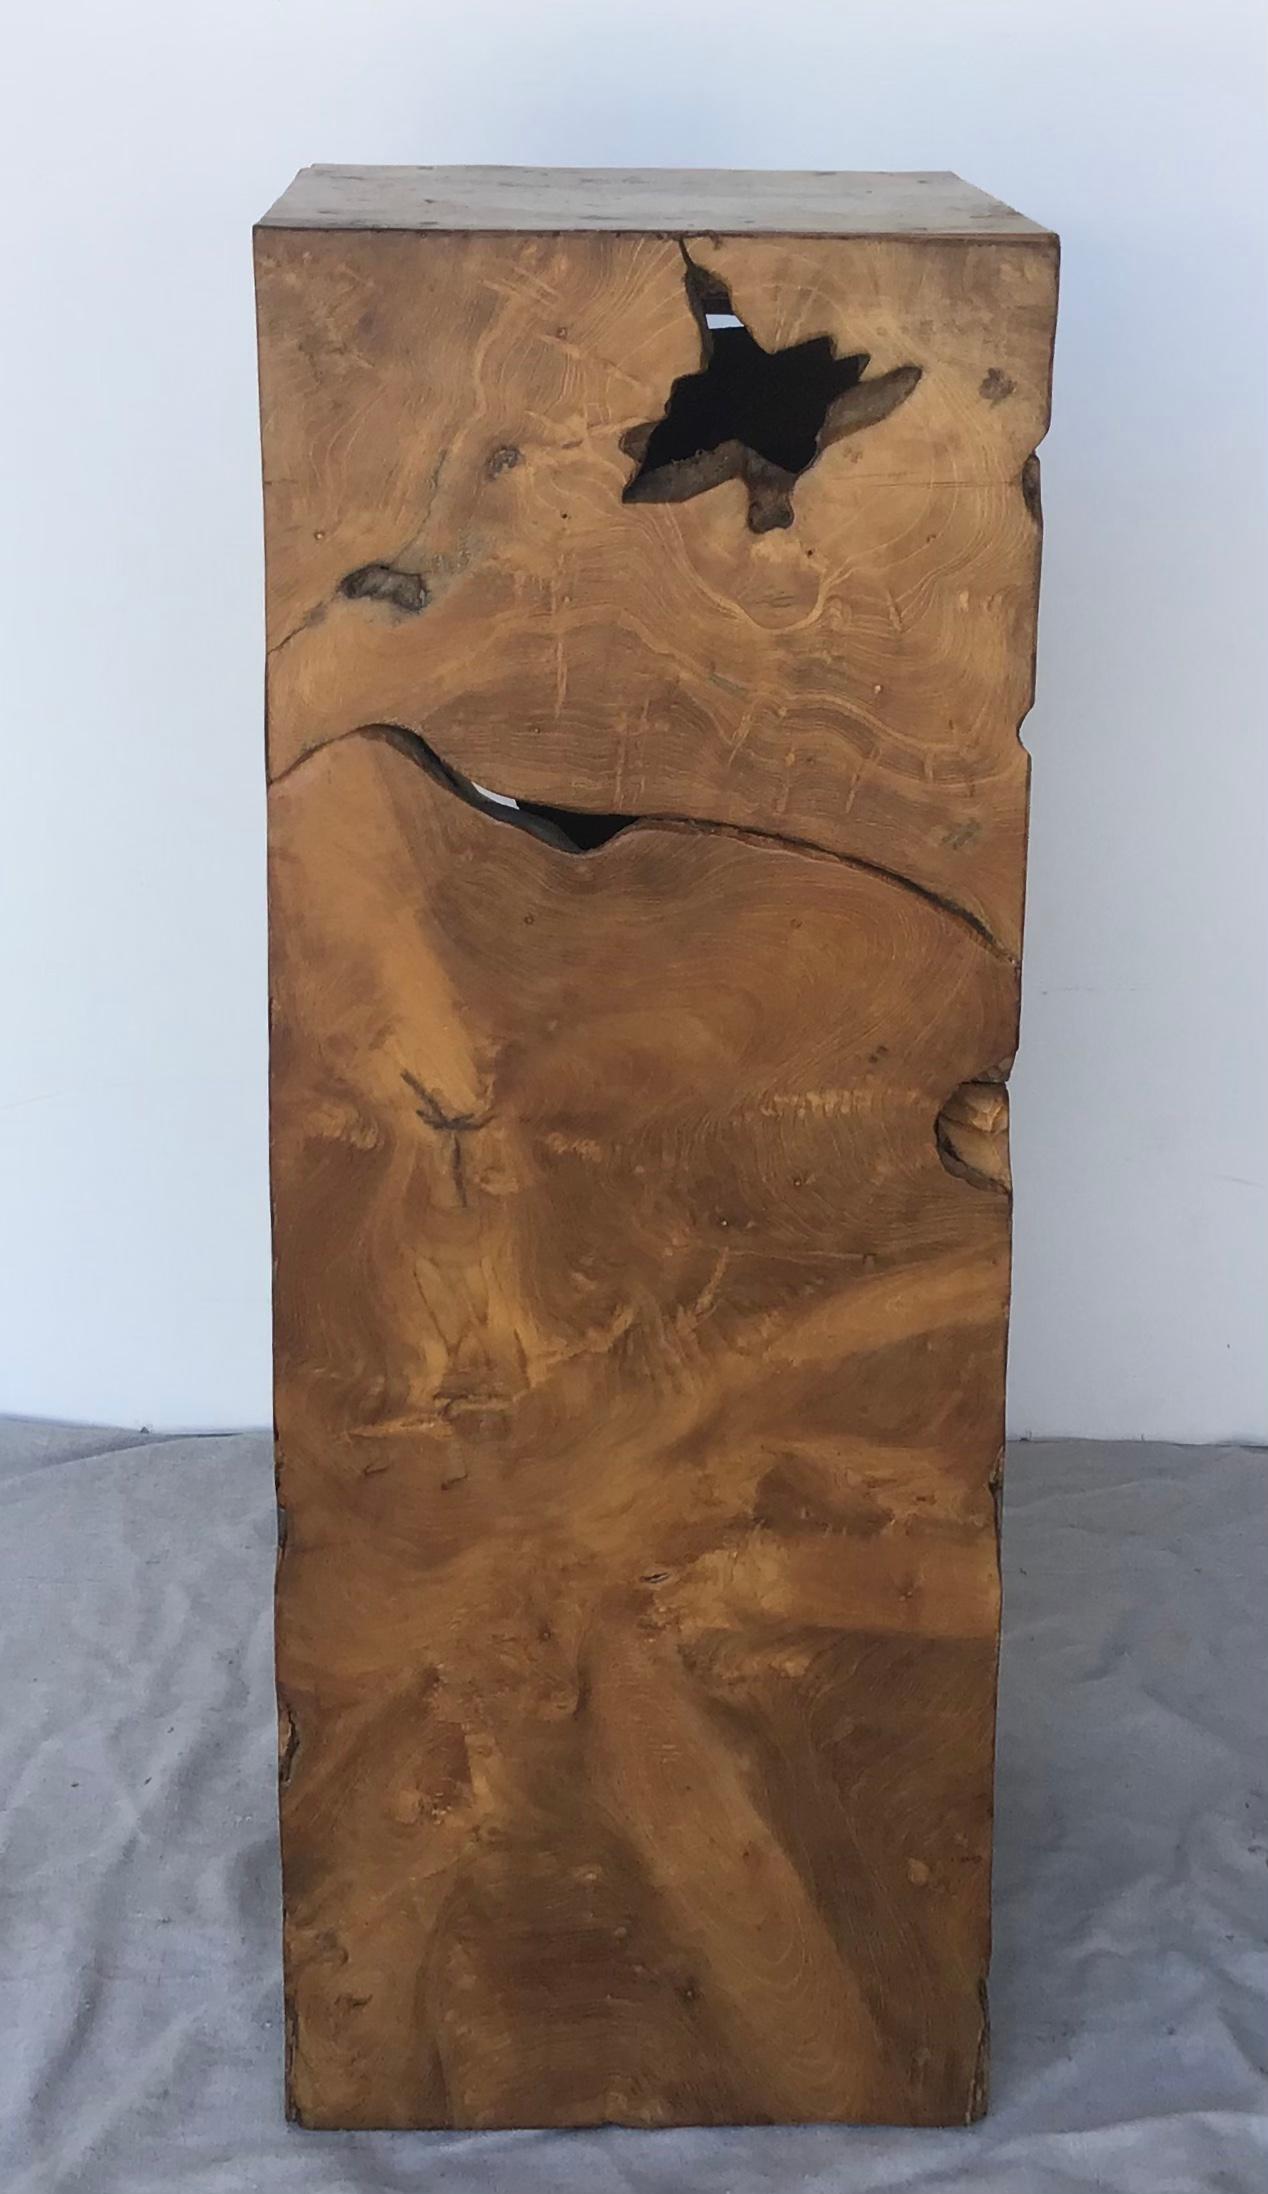 Nice burled wood column that can be used as a table or to display a sculpture. This rustic yet chic pedestal has been artisan created with a live-edge burl wood, with wonderful knobby bits, voids, and organic movement to it.  This burl wood pedestal